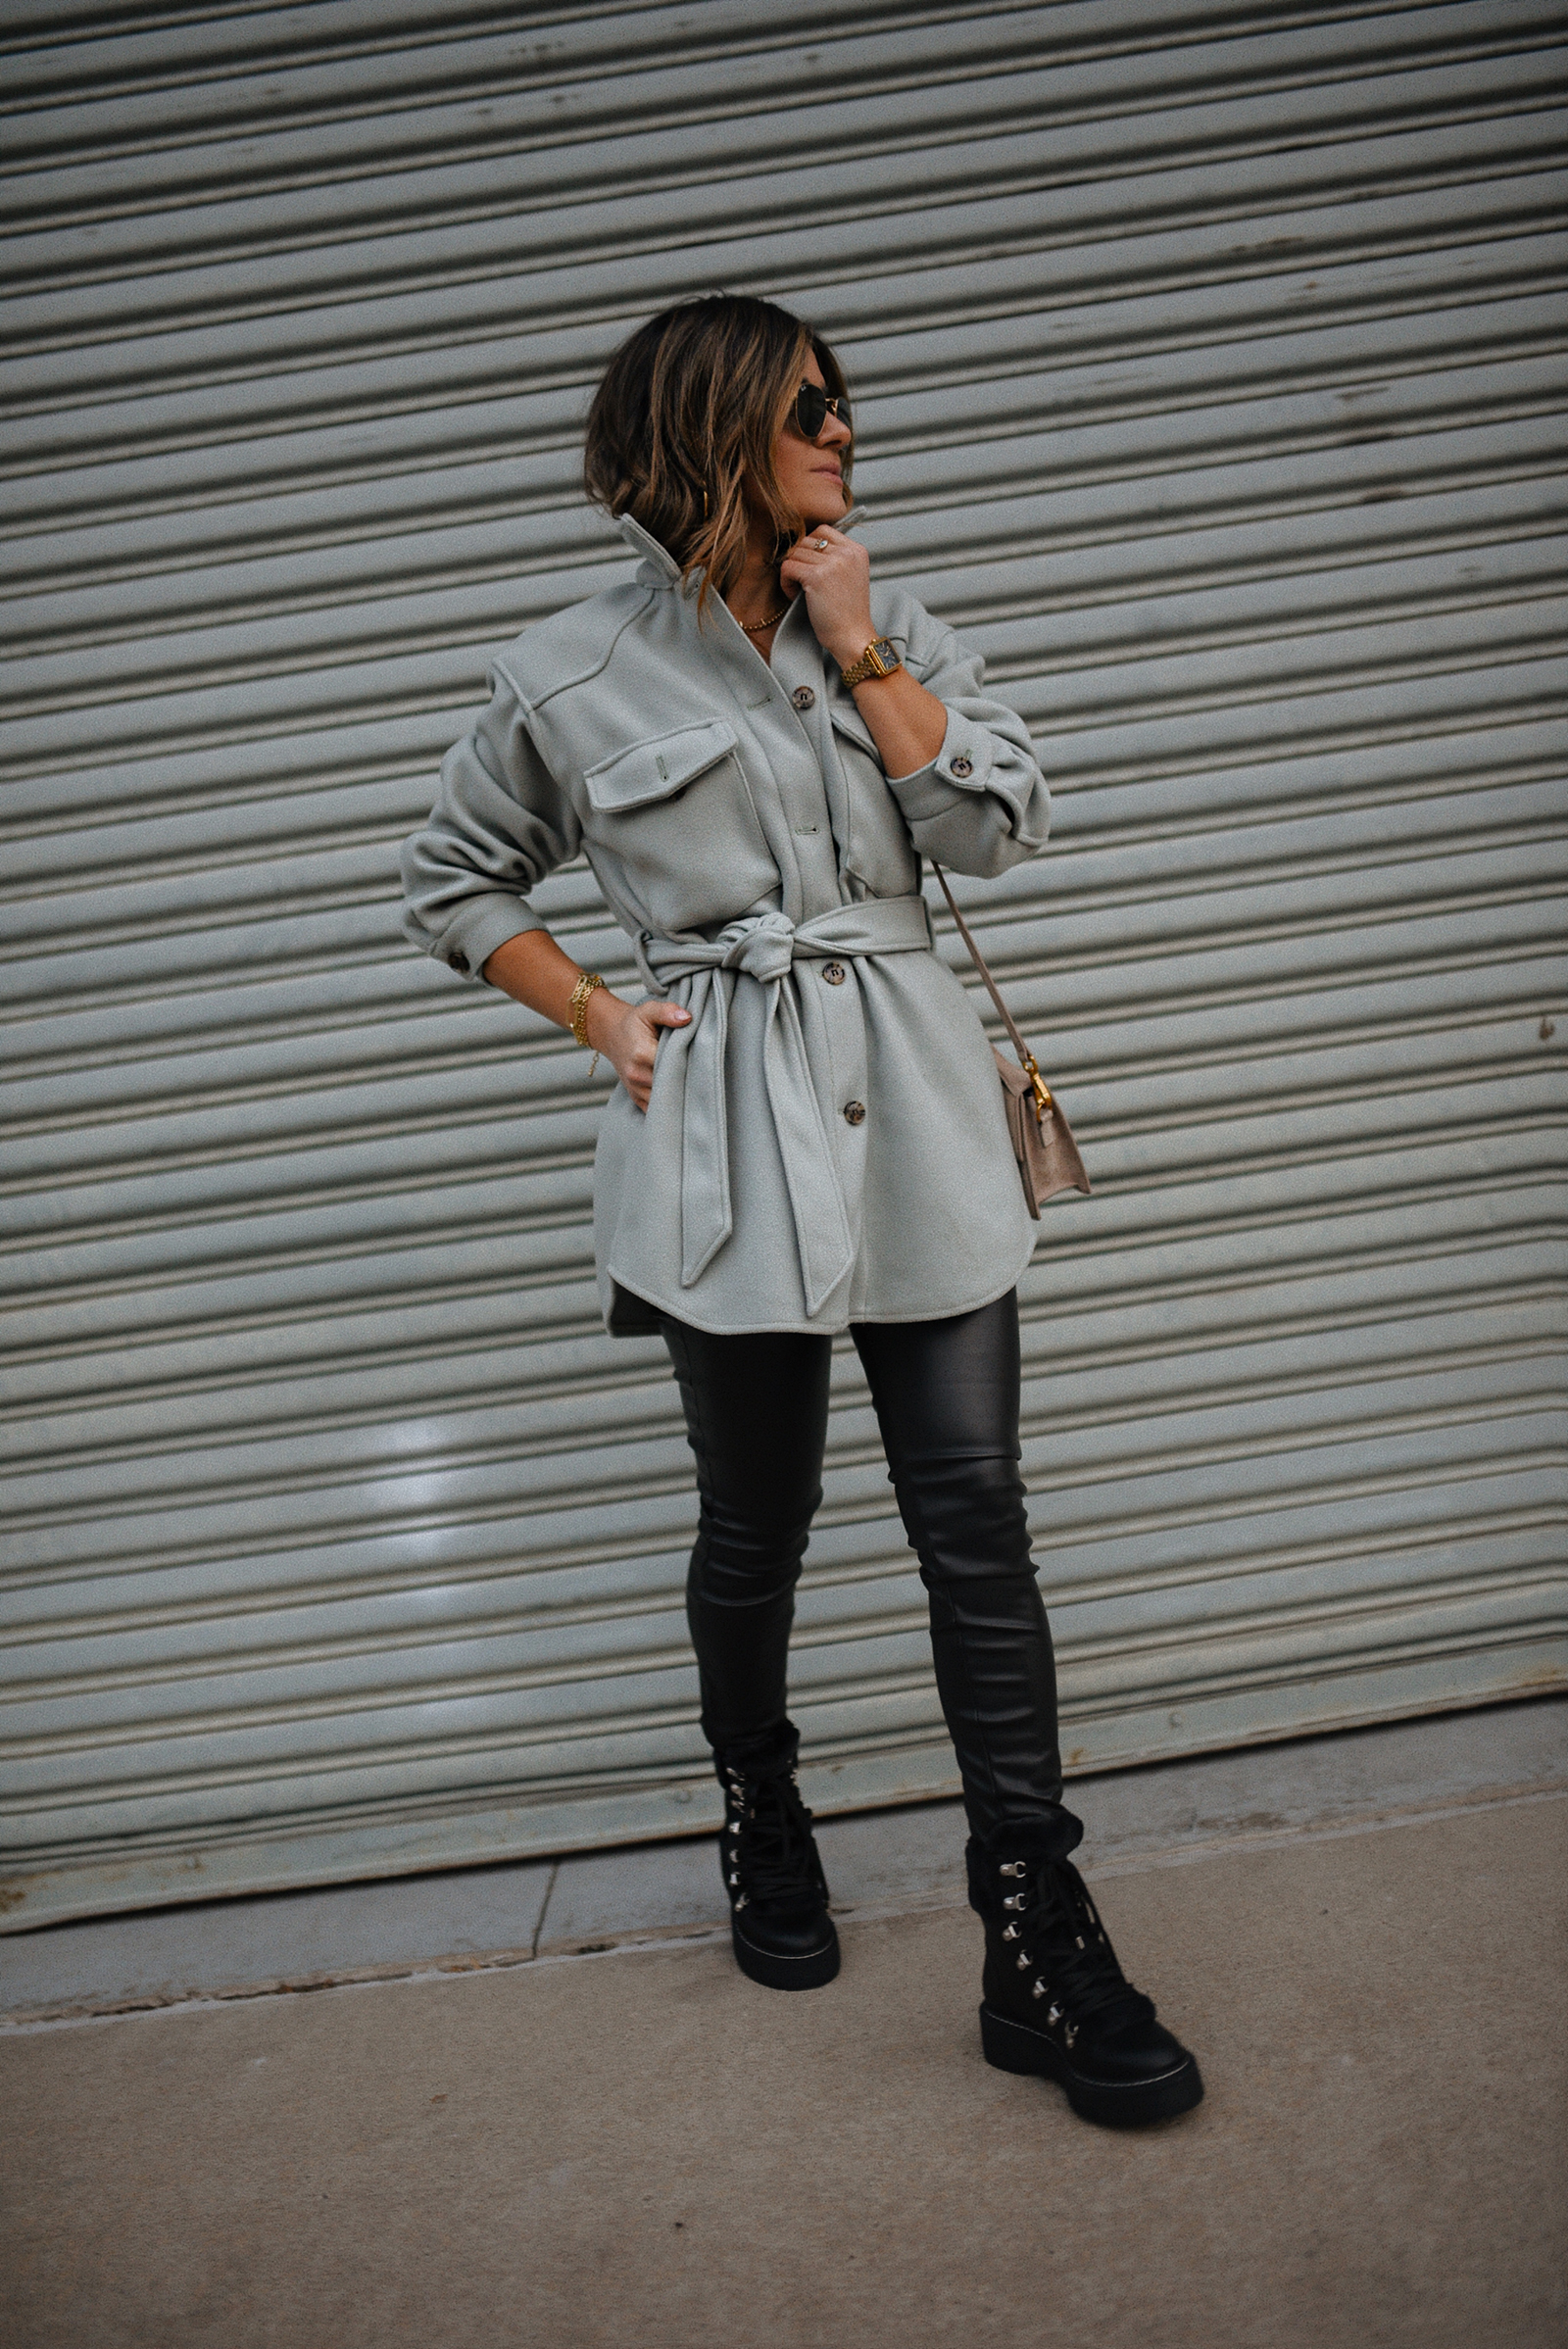 Carolina Hellal of Chic Talk wearing a shacket, faux leather pants and combat boots. 